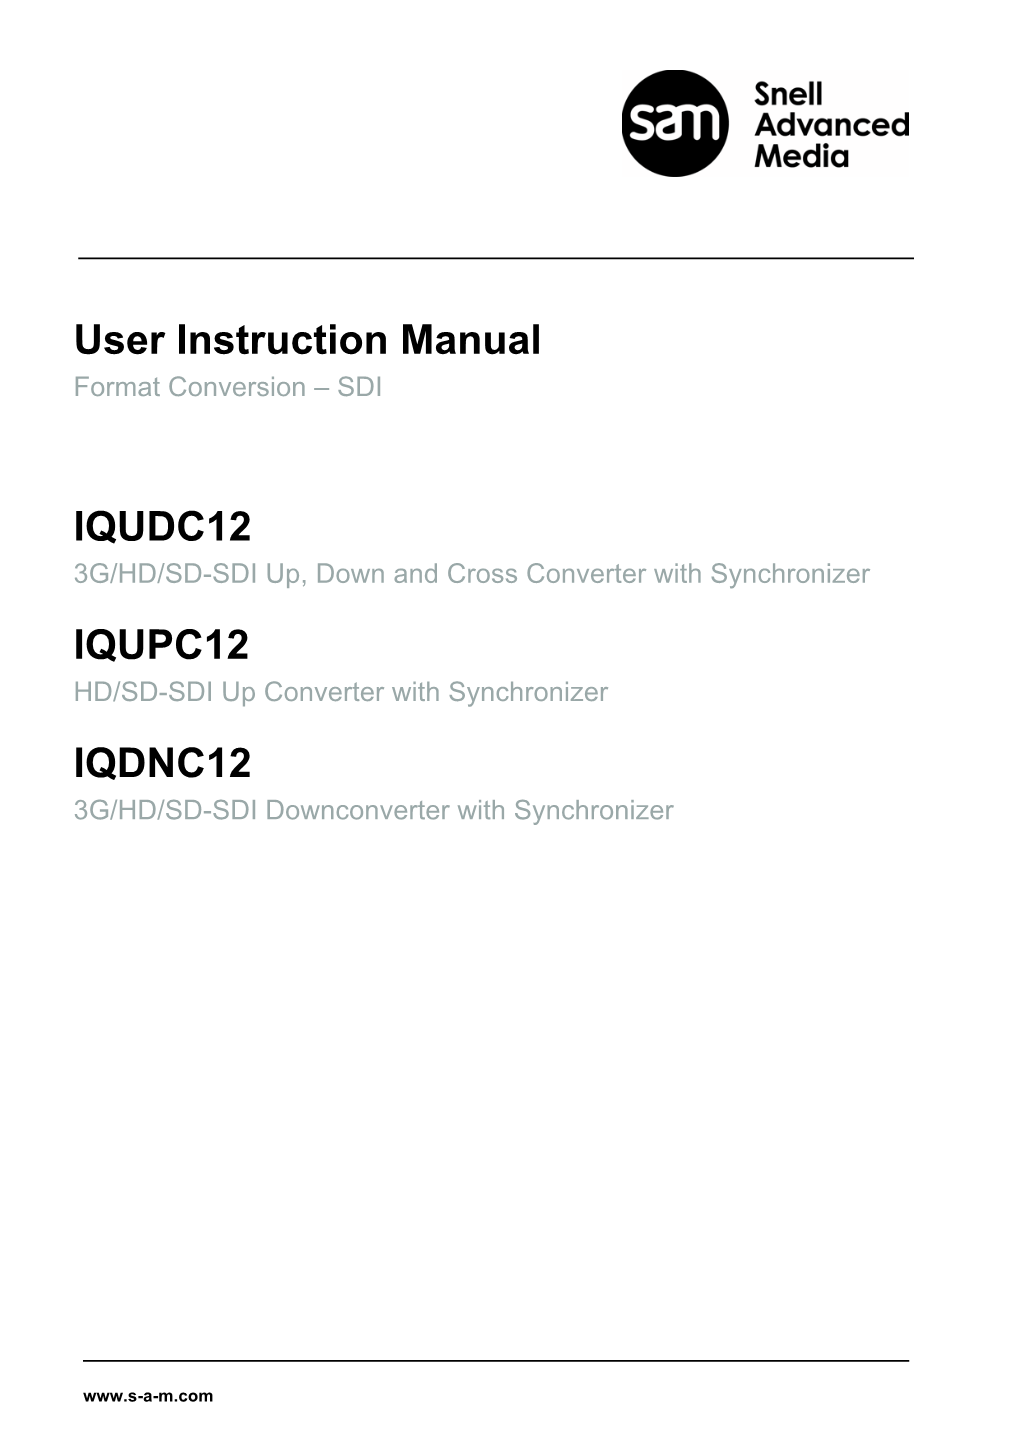 IQUDC12/IQUPC12/IQDNC12 User Instruction Manual Issue 1 Rev 1